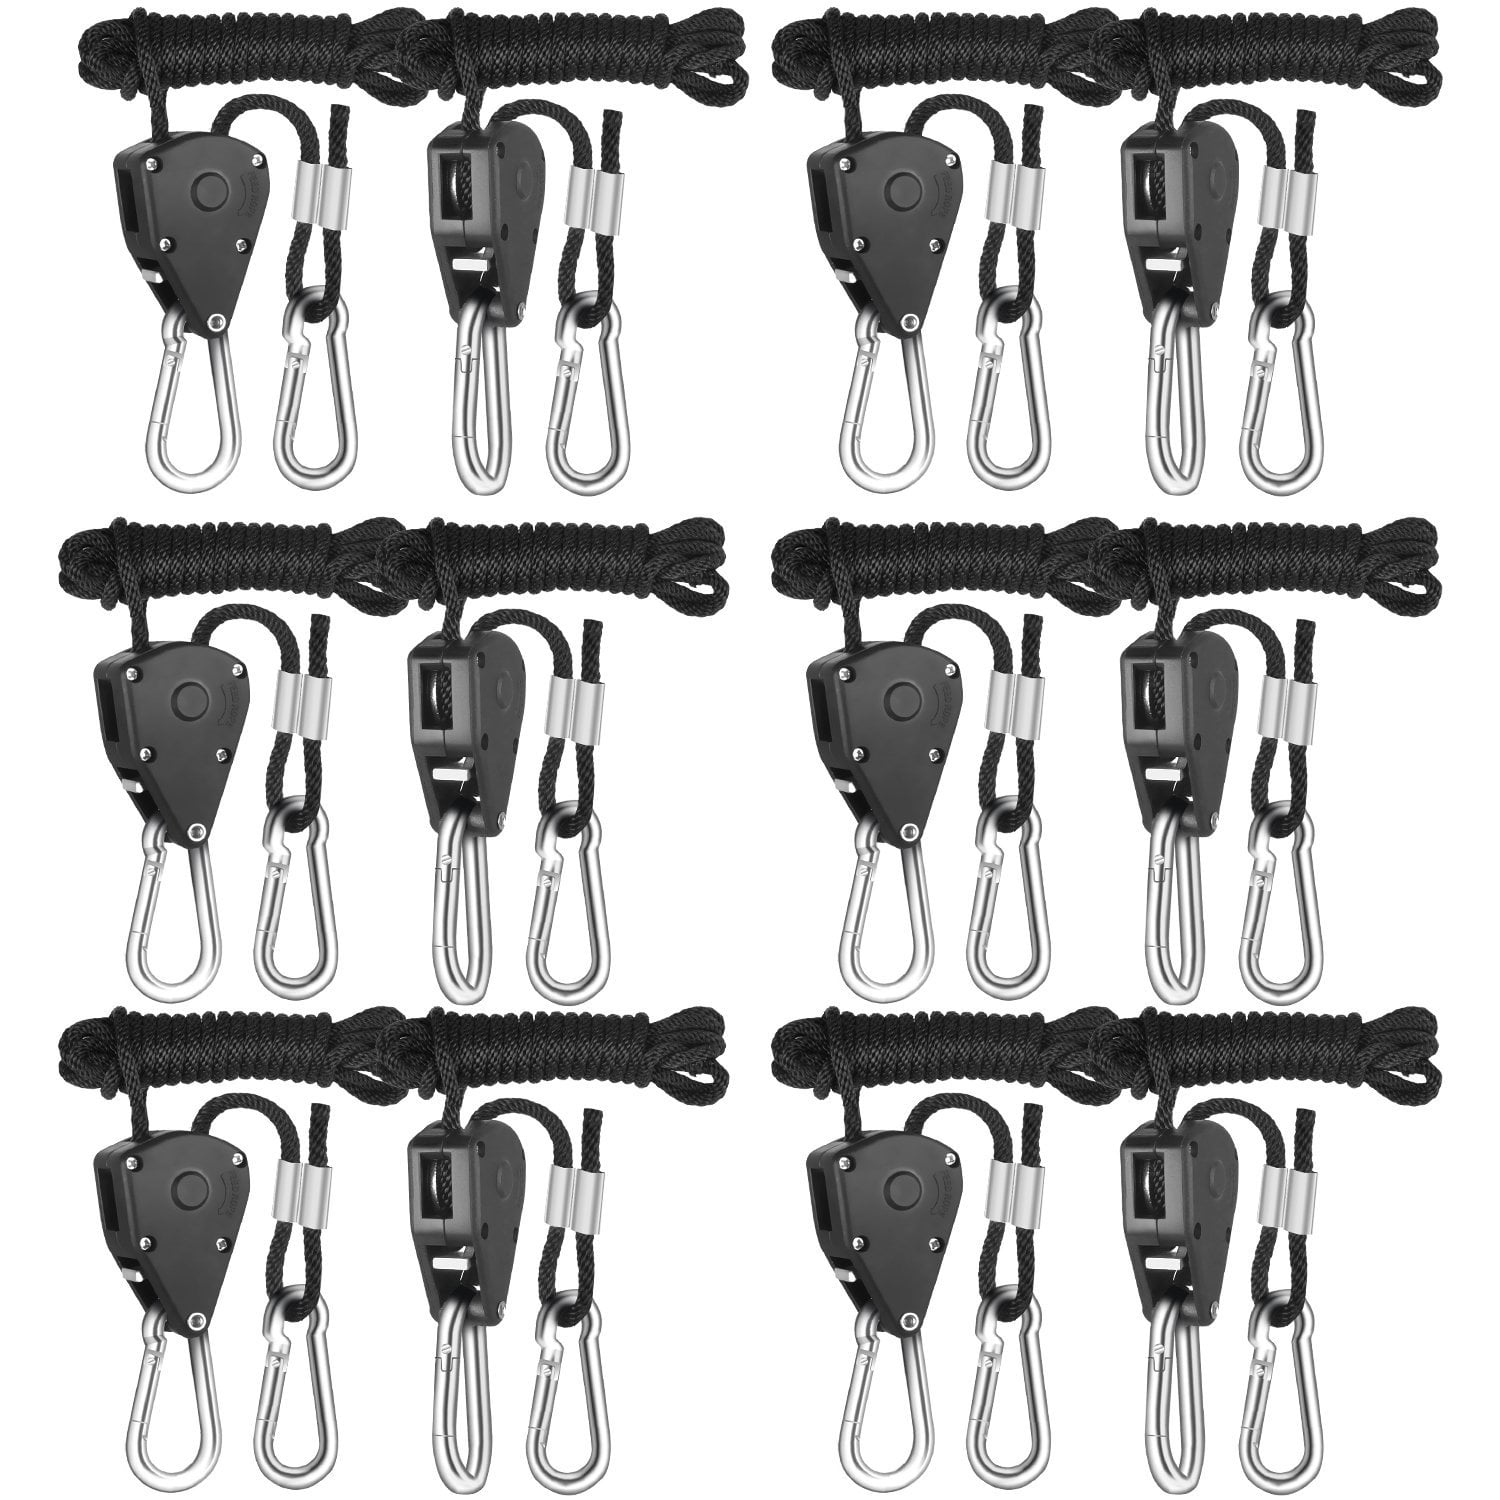 iPower 6-Pack 1/8 inch 8-Feet Long Heavy Duty Adjustable Rope Clip Hanger, 150lb Capacity